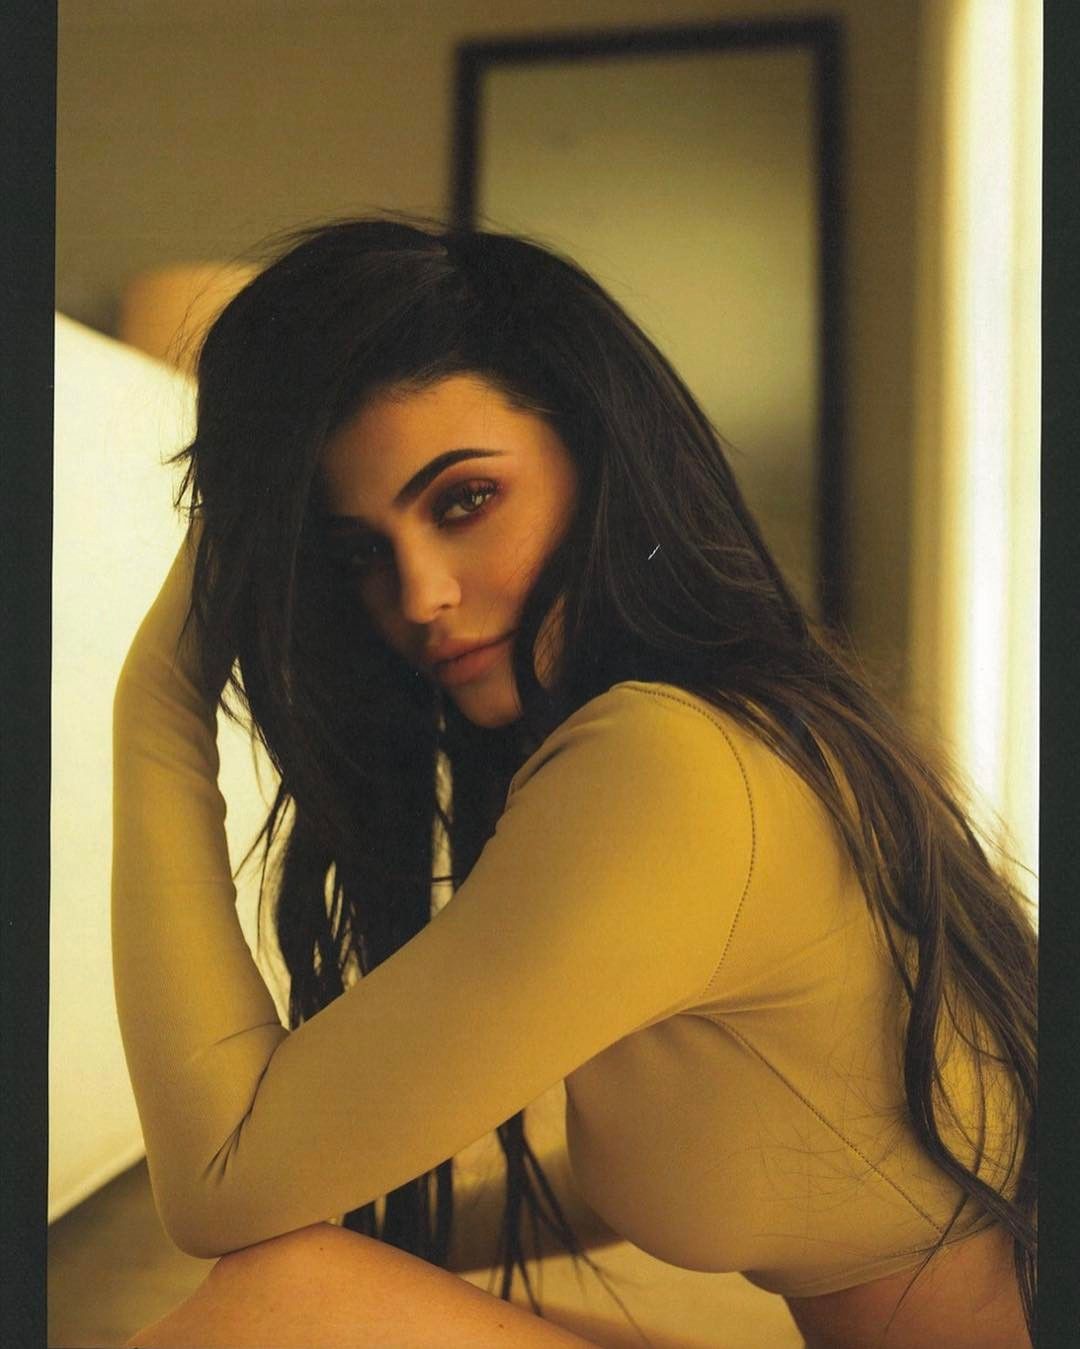 Sexy Photos of Kylie Jenner #79638985